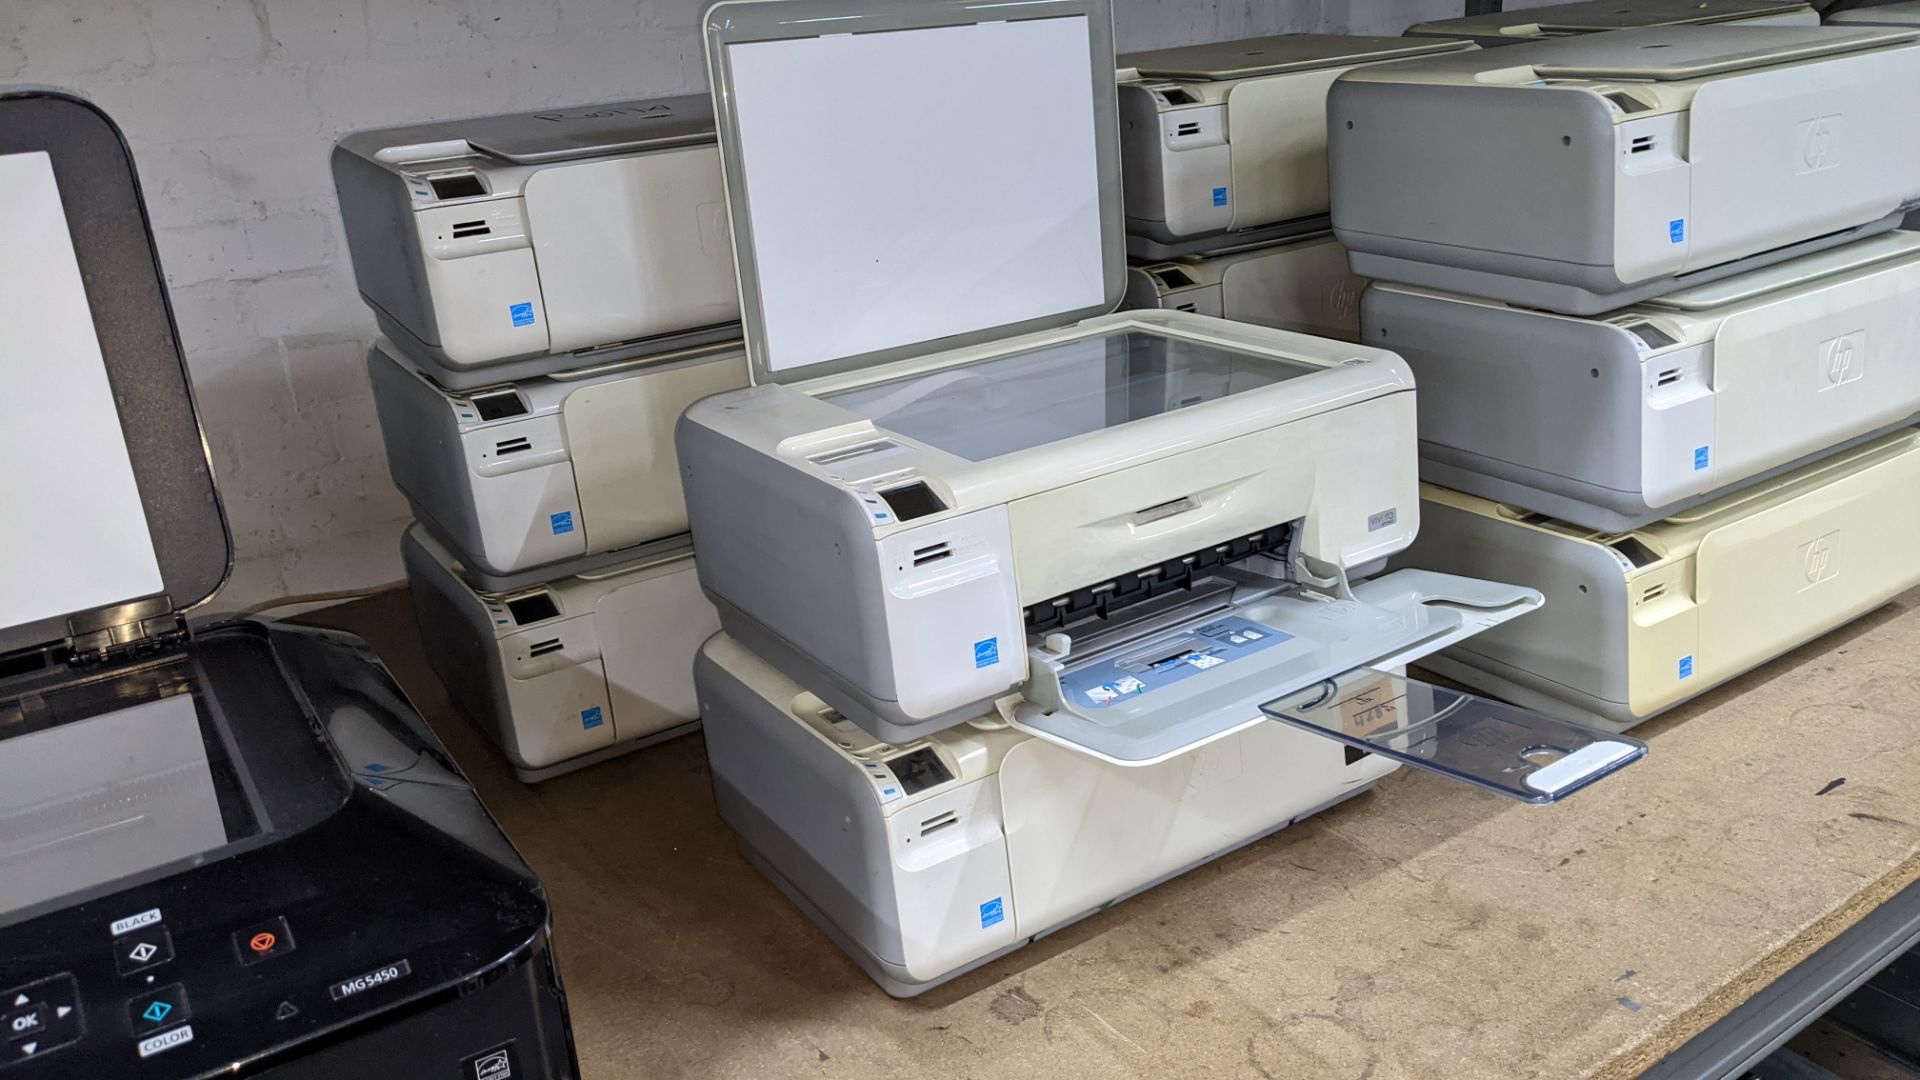 17 off HP Photo Smart C4480 printers NB. No power leads & cables - Image 4 of 6